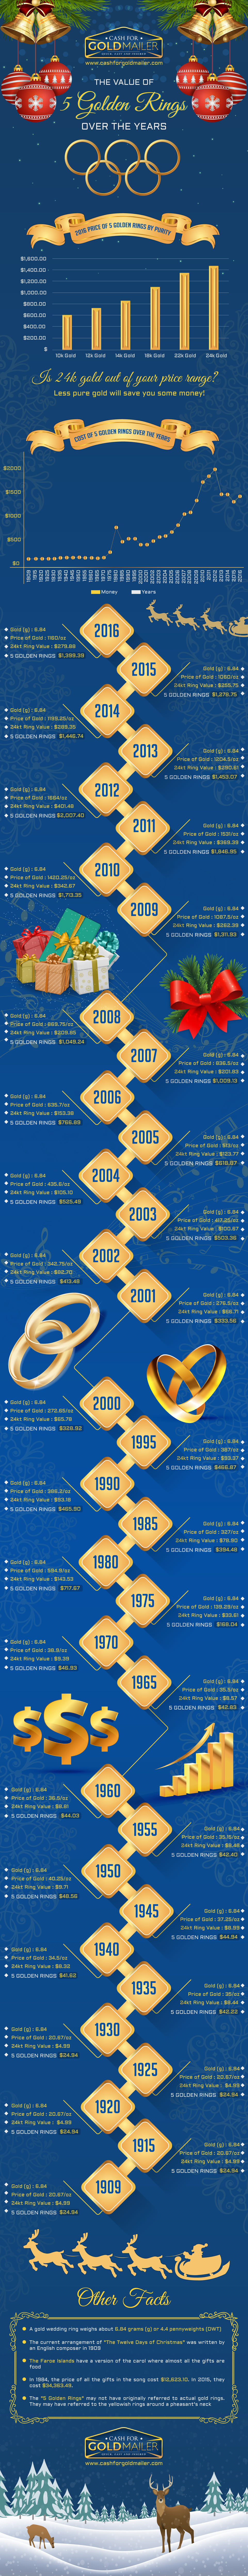 The Value of “5 Golden Rings” Over the Years – The 12 Days of Christmas